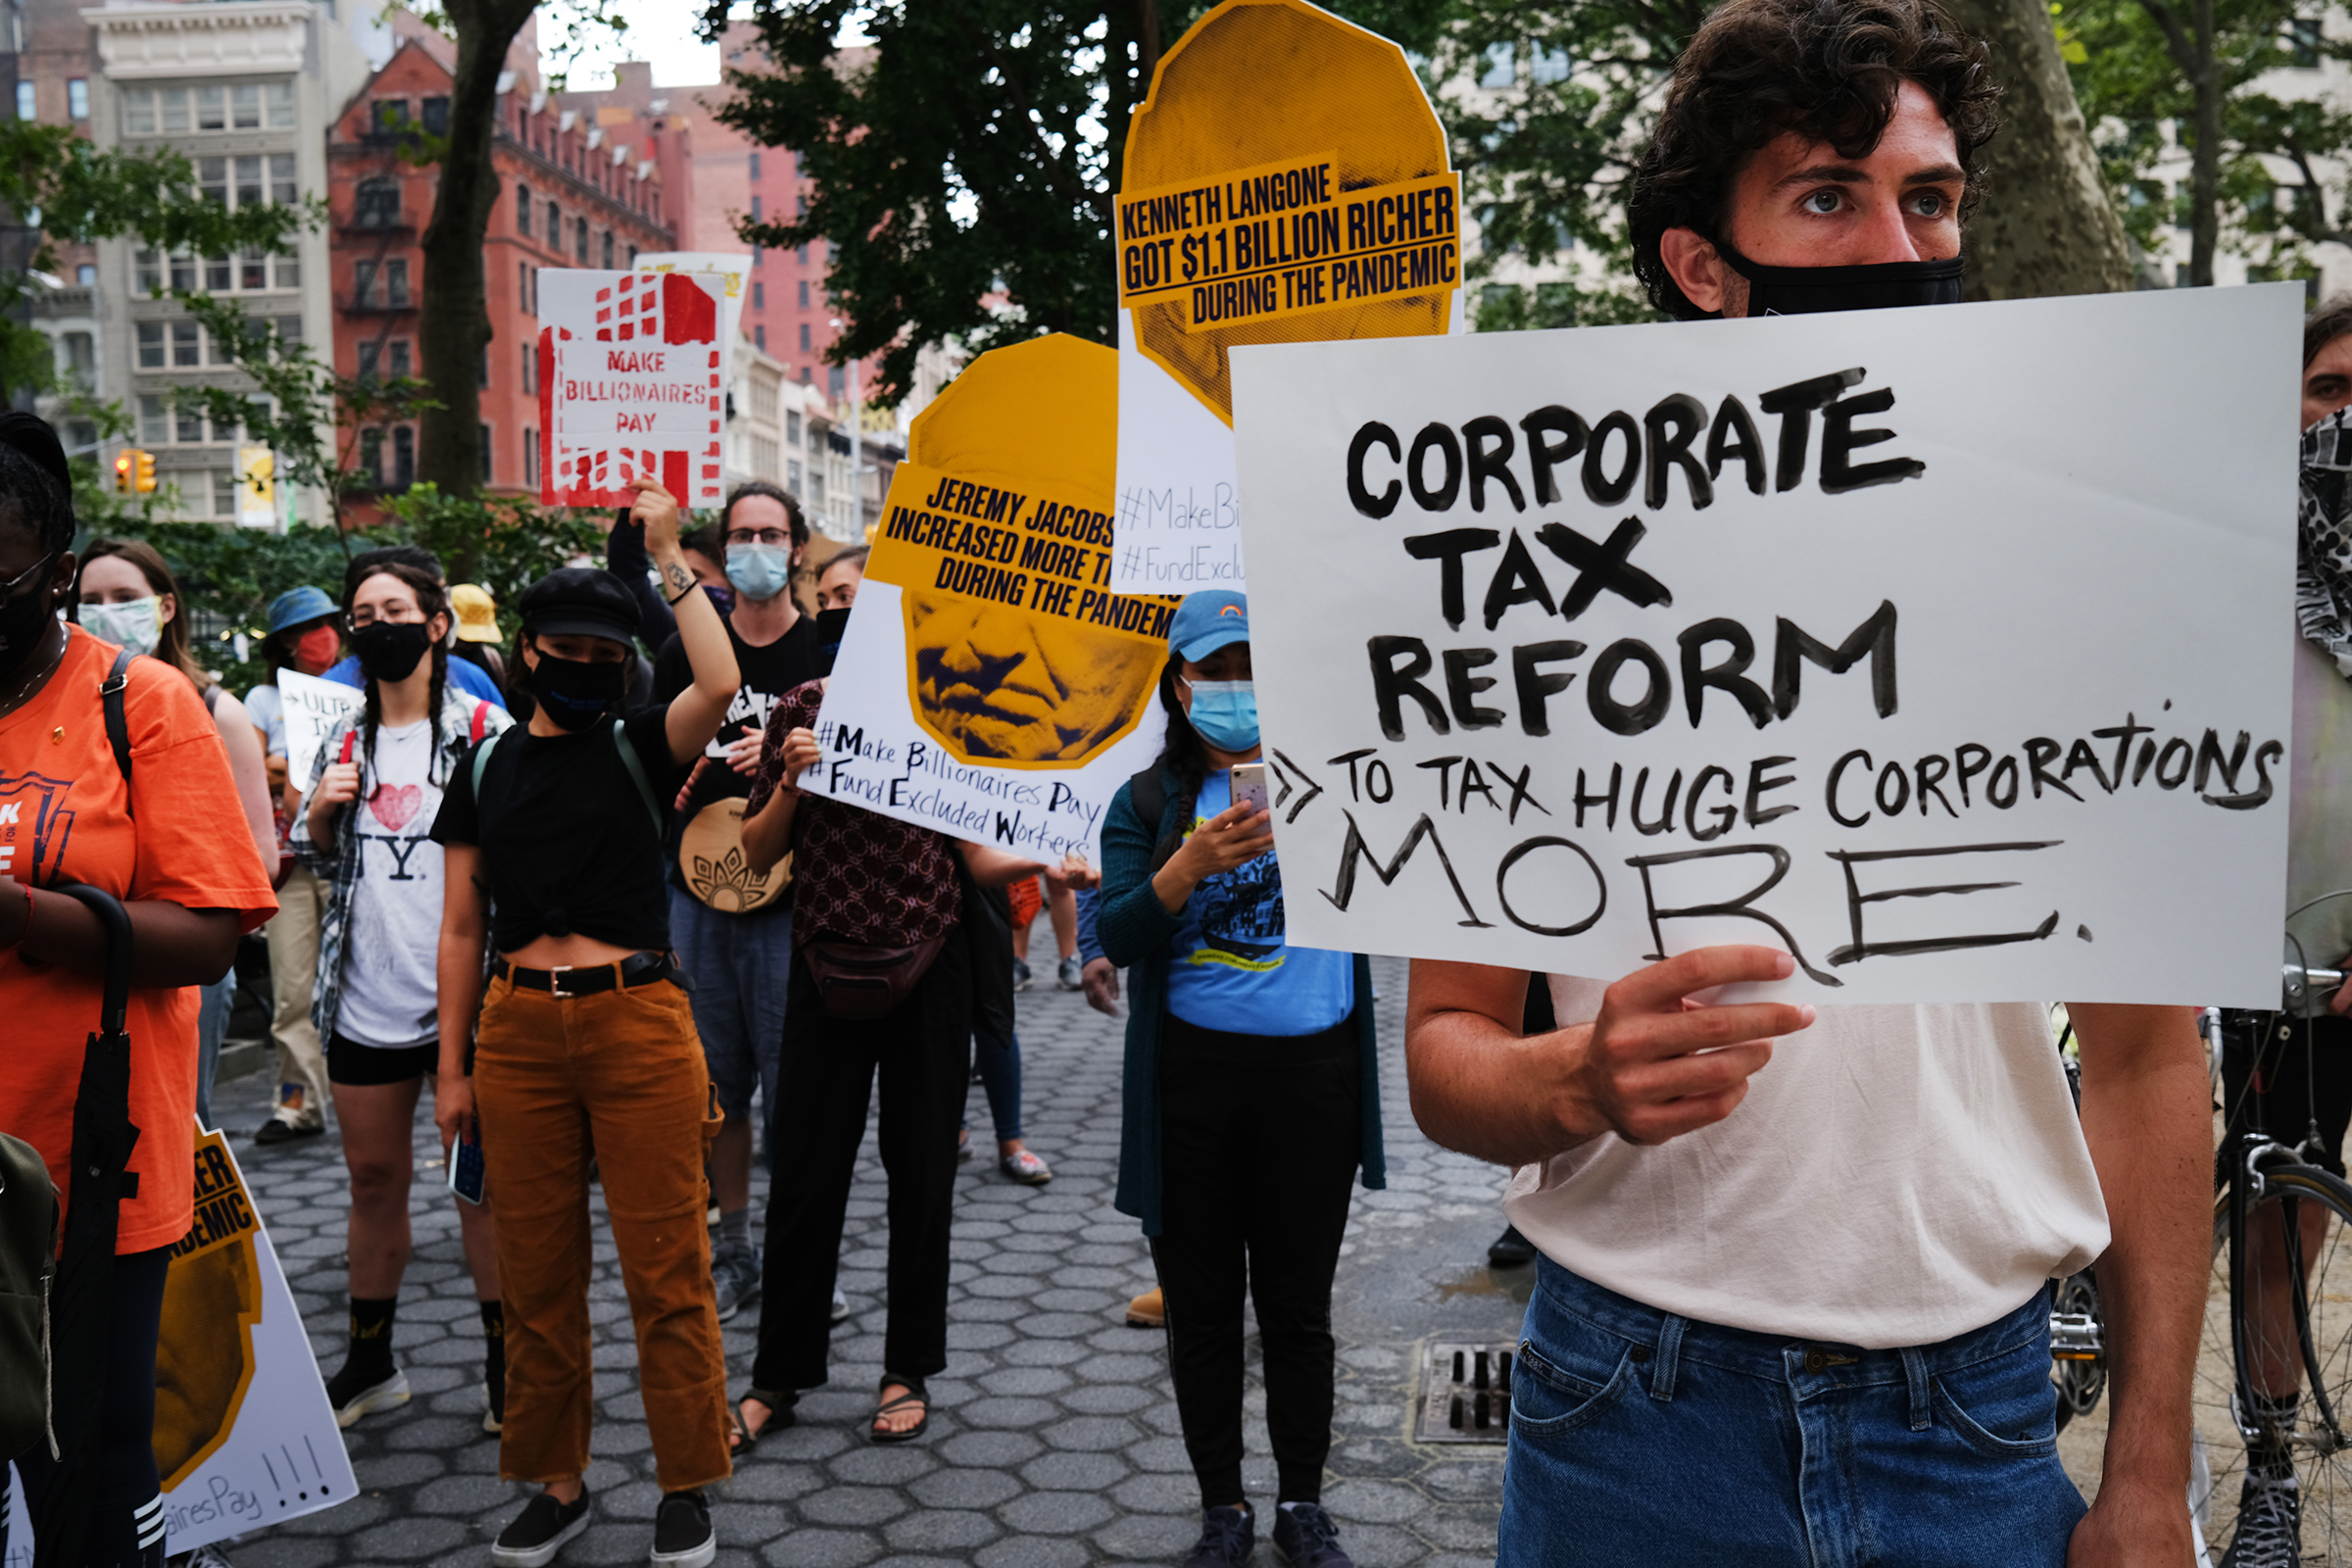 People participate in a "March on Billionaires" event on July 17 in New York City.